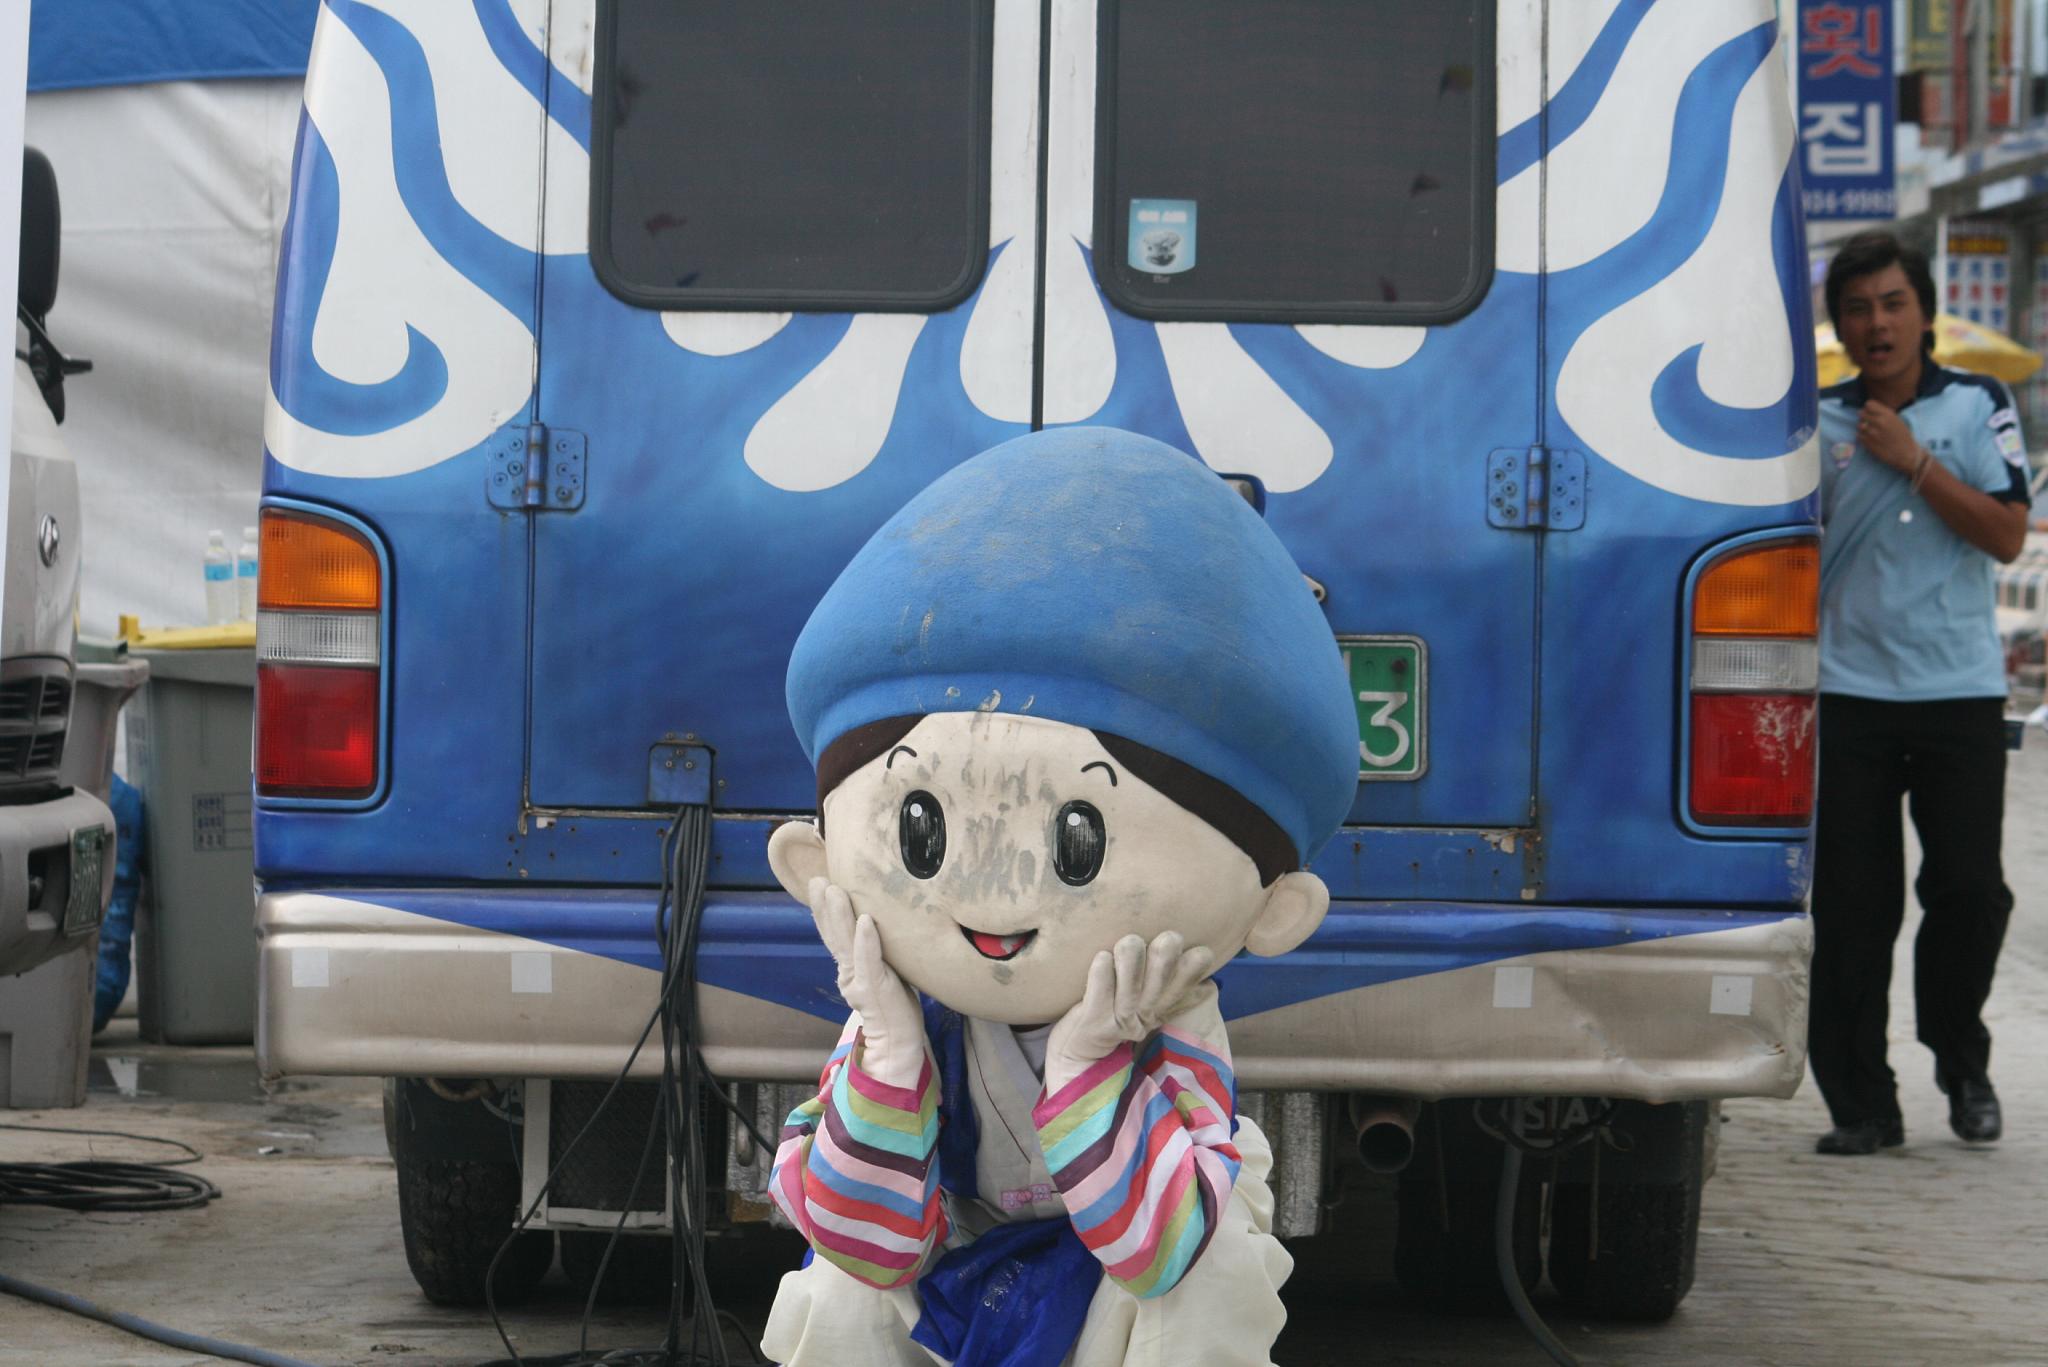 a man with a blue hat standing by a bus